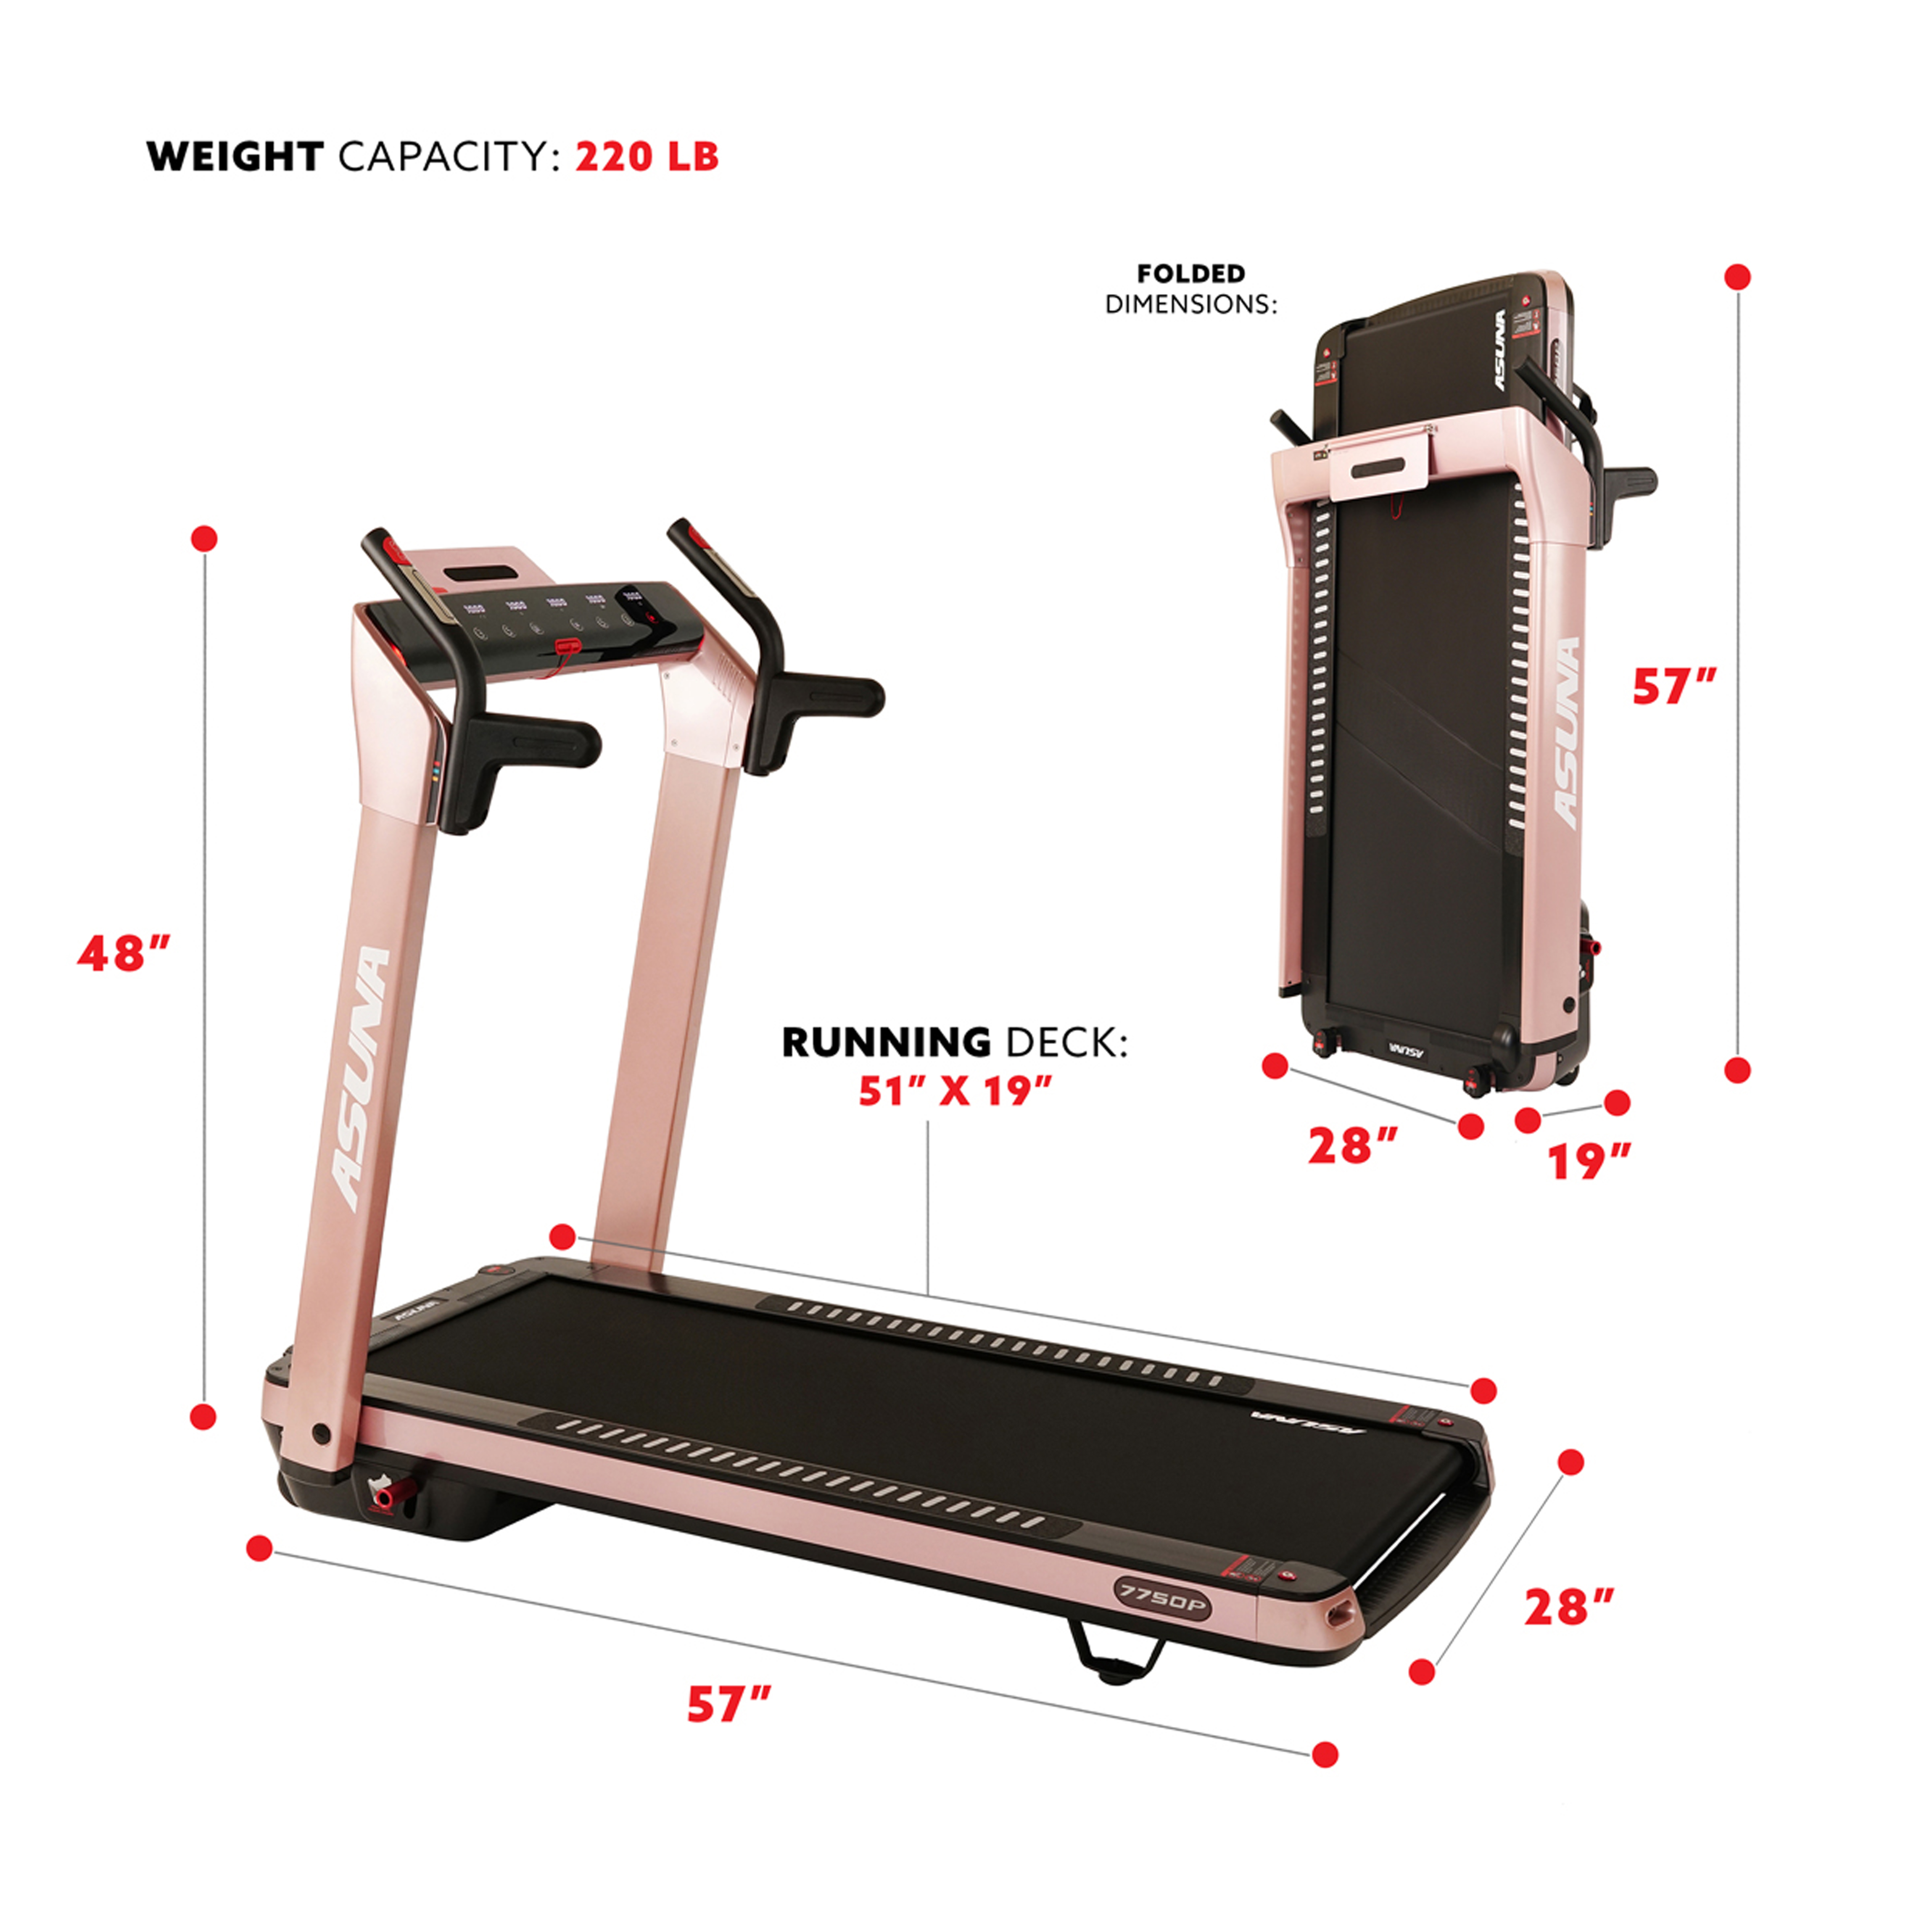 ASUNA SpaceFlex Motorized Treadmill with Auto Incline, Wide Folding Belt - 7750Pink - image 6 of 9